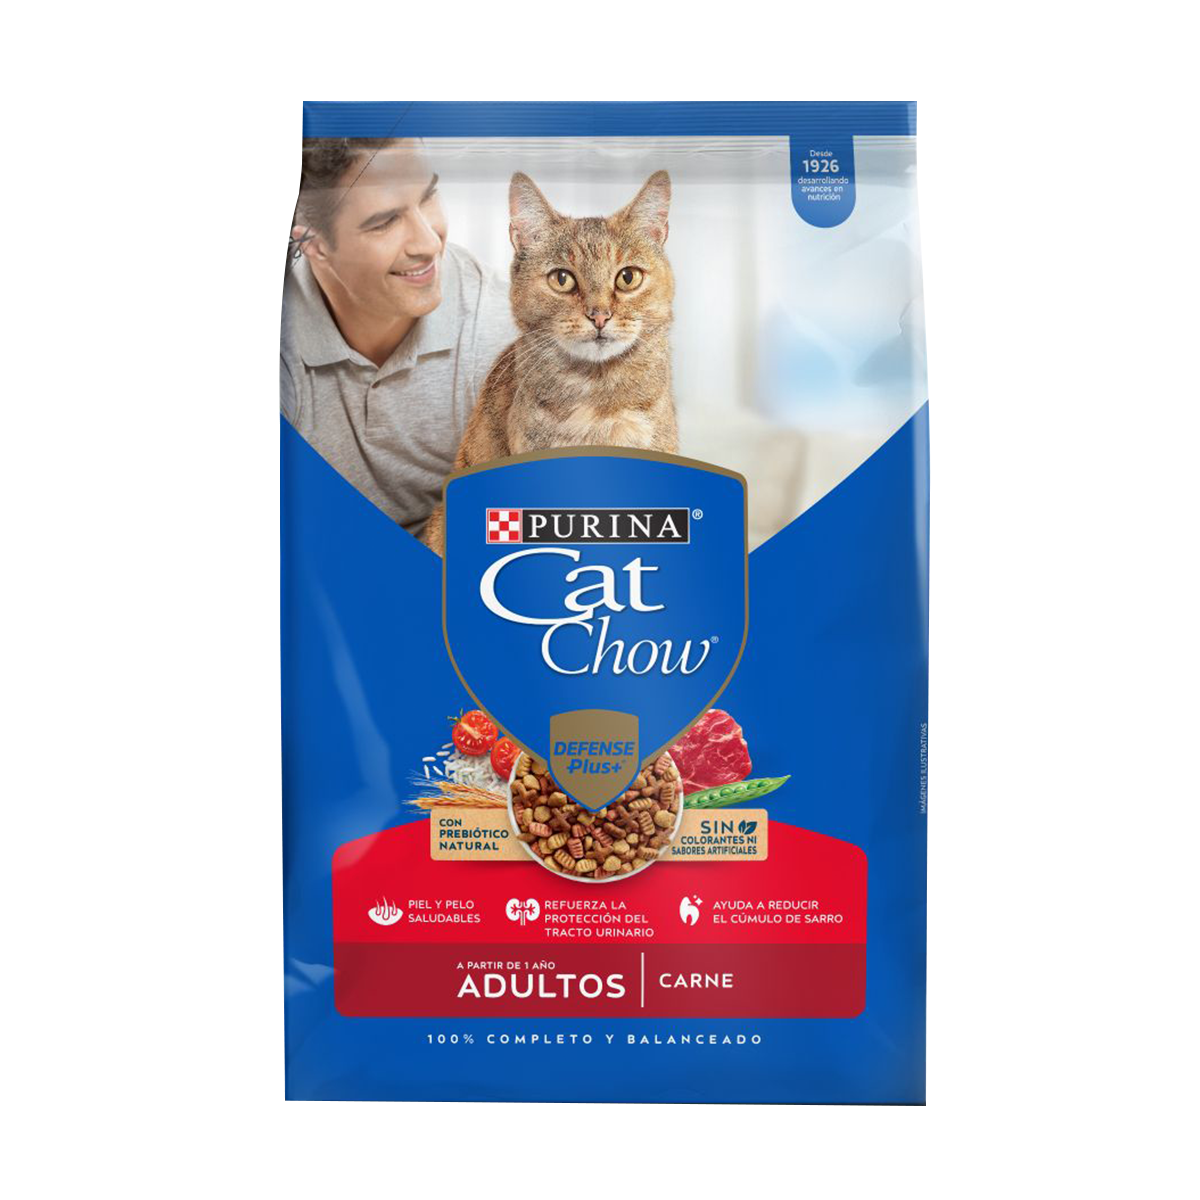 Purina-Cat-Chow-DRY-Carne-adultos-01_0.png